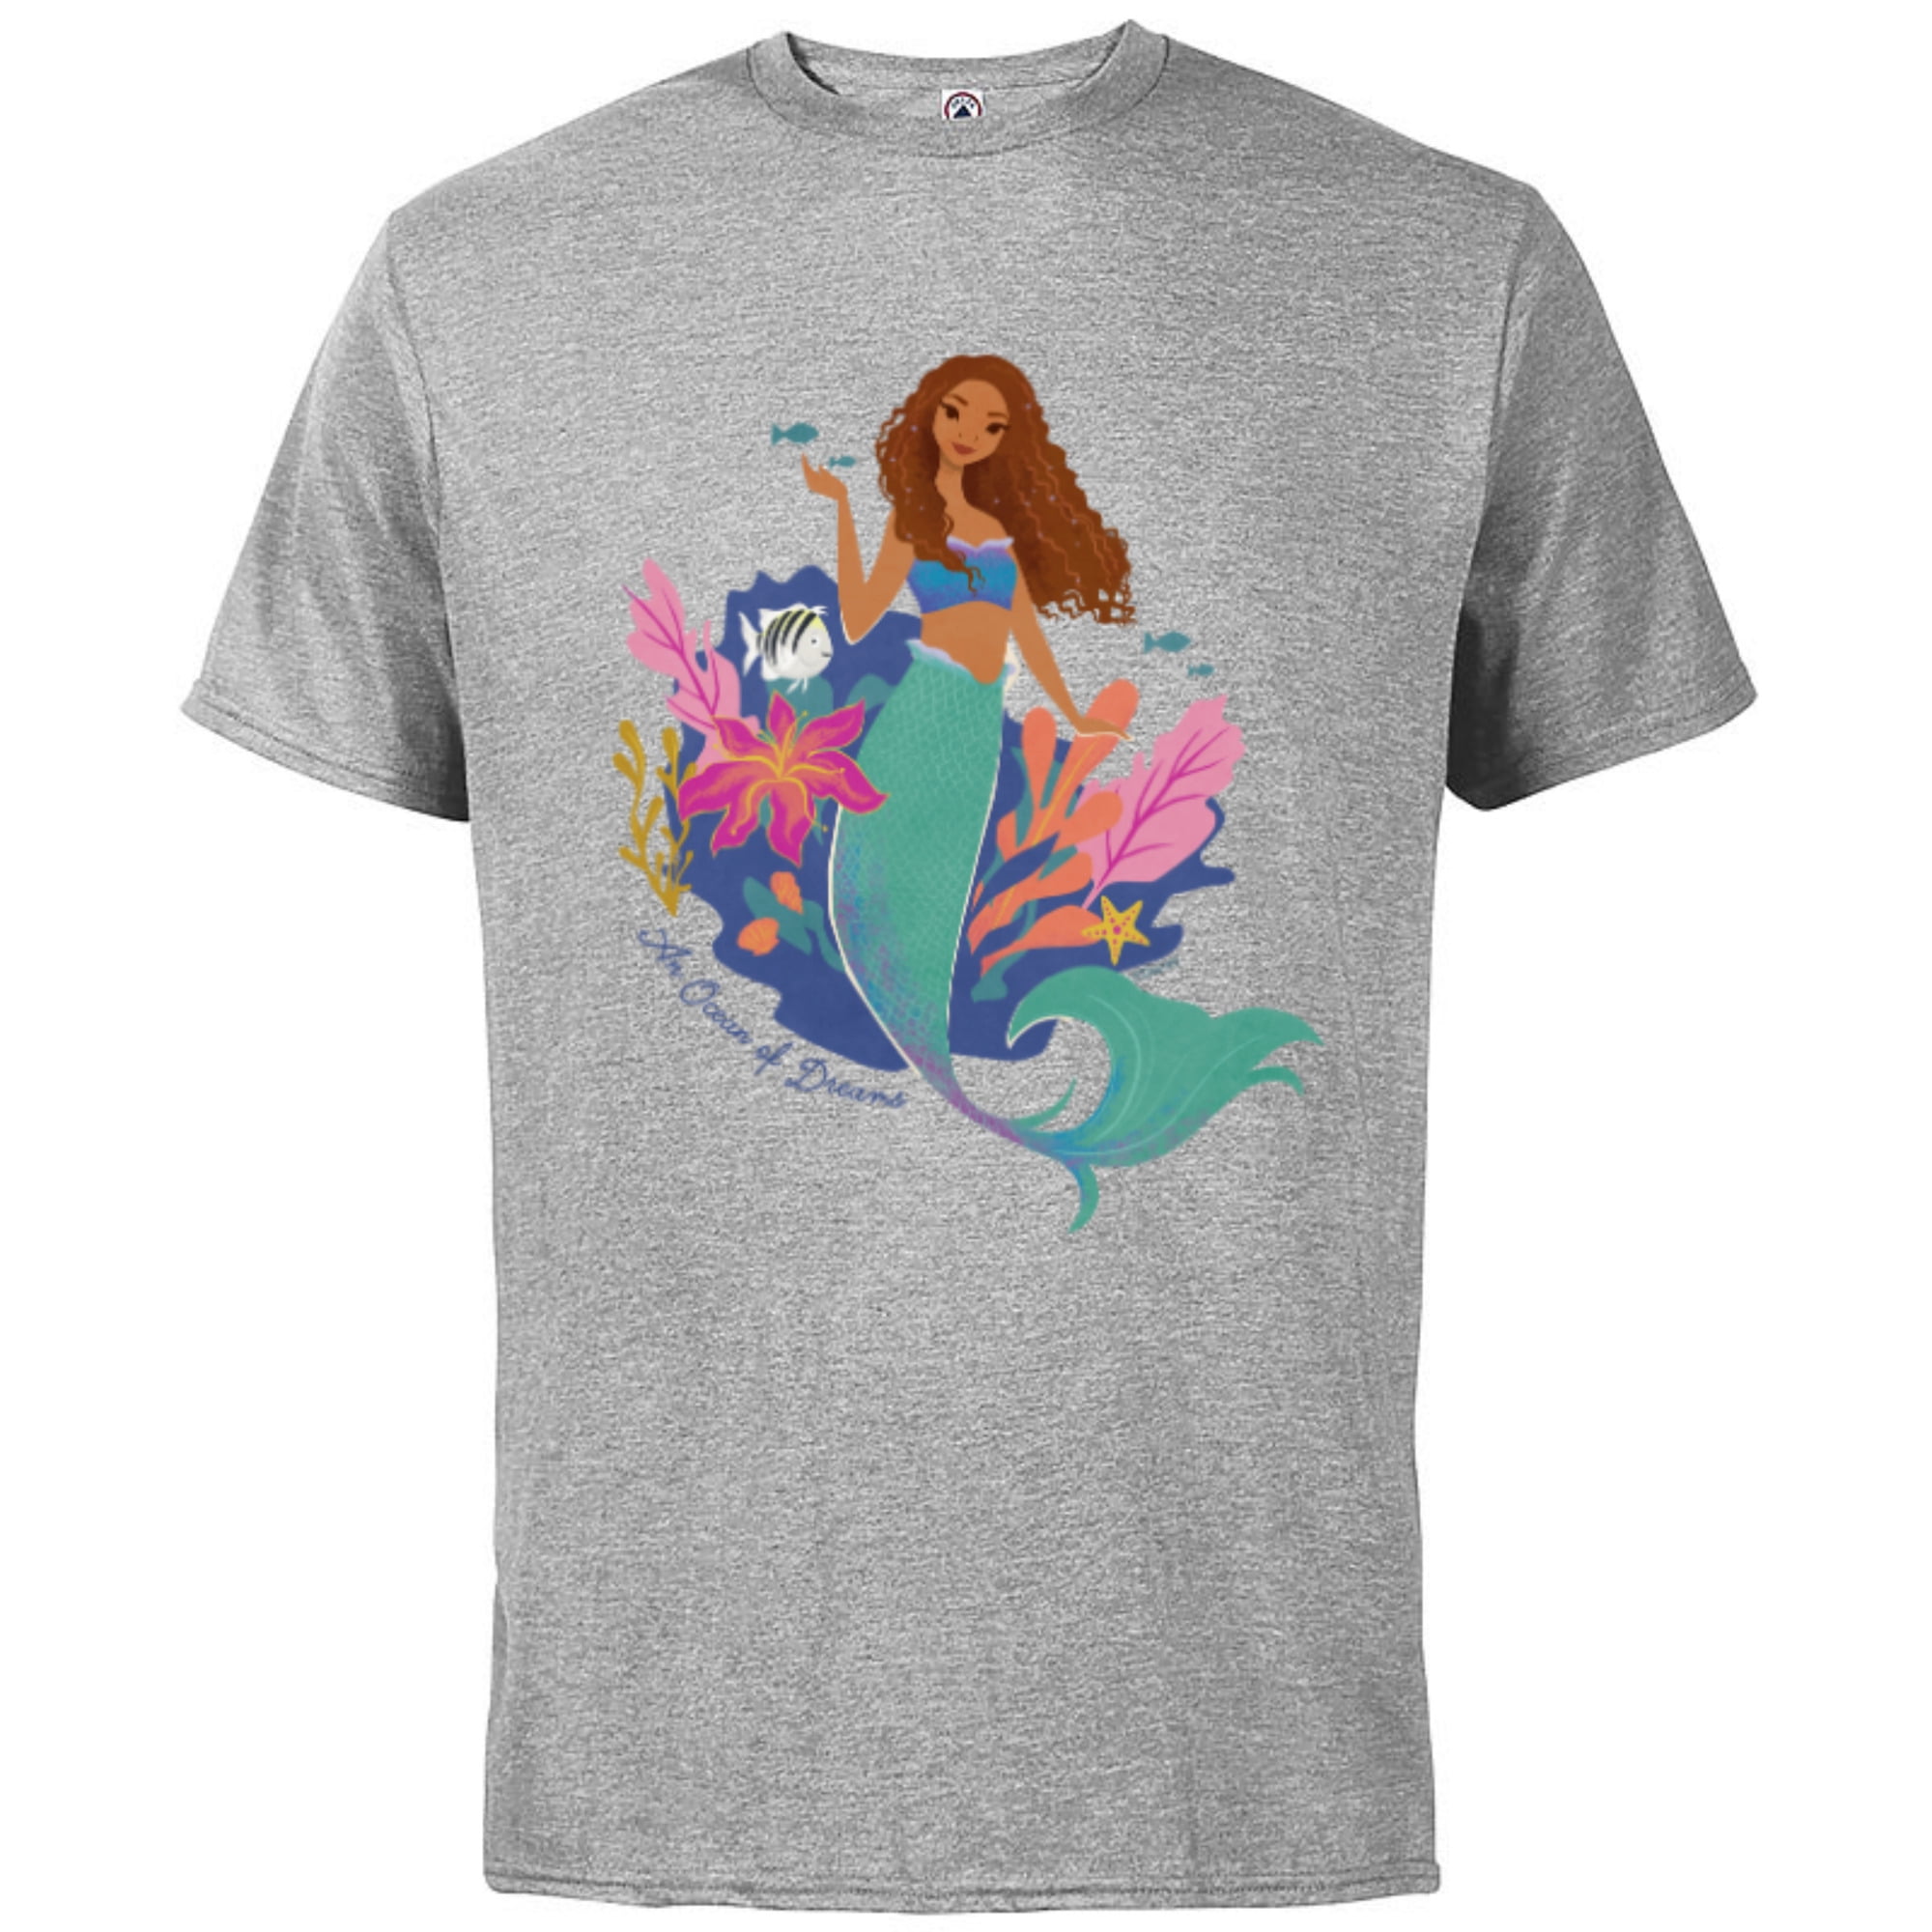 Customized-Athletic - Short - Heather An for Ariel Shirt Cotton Mermaid T- of Disney Dreams Little Sleeve Ocean Adults The